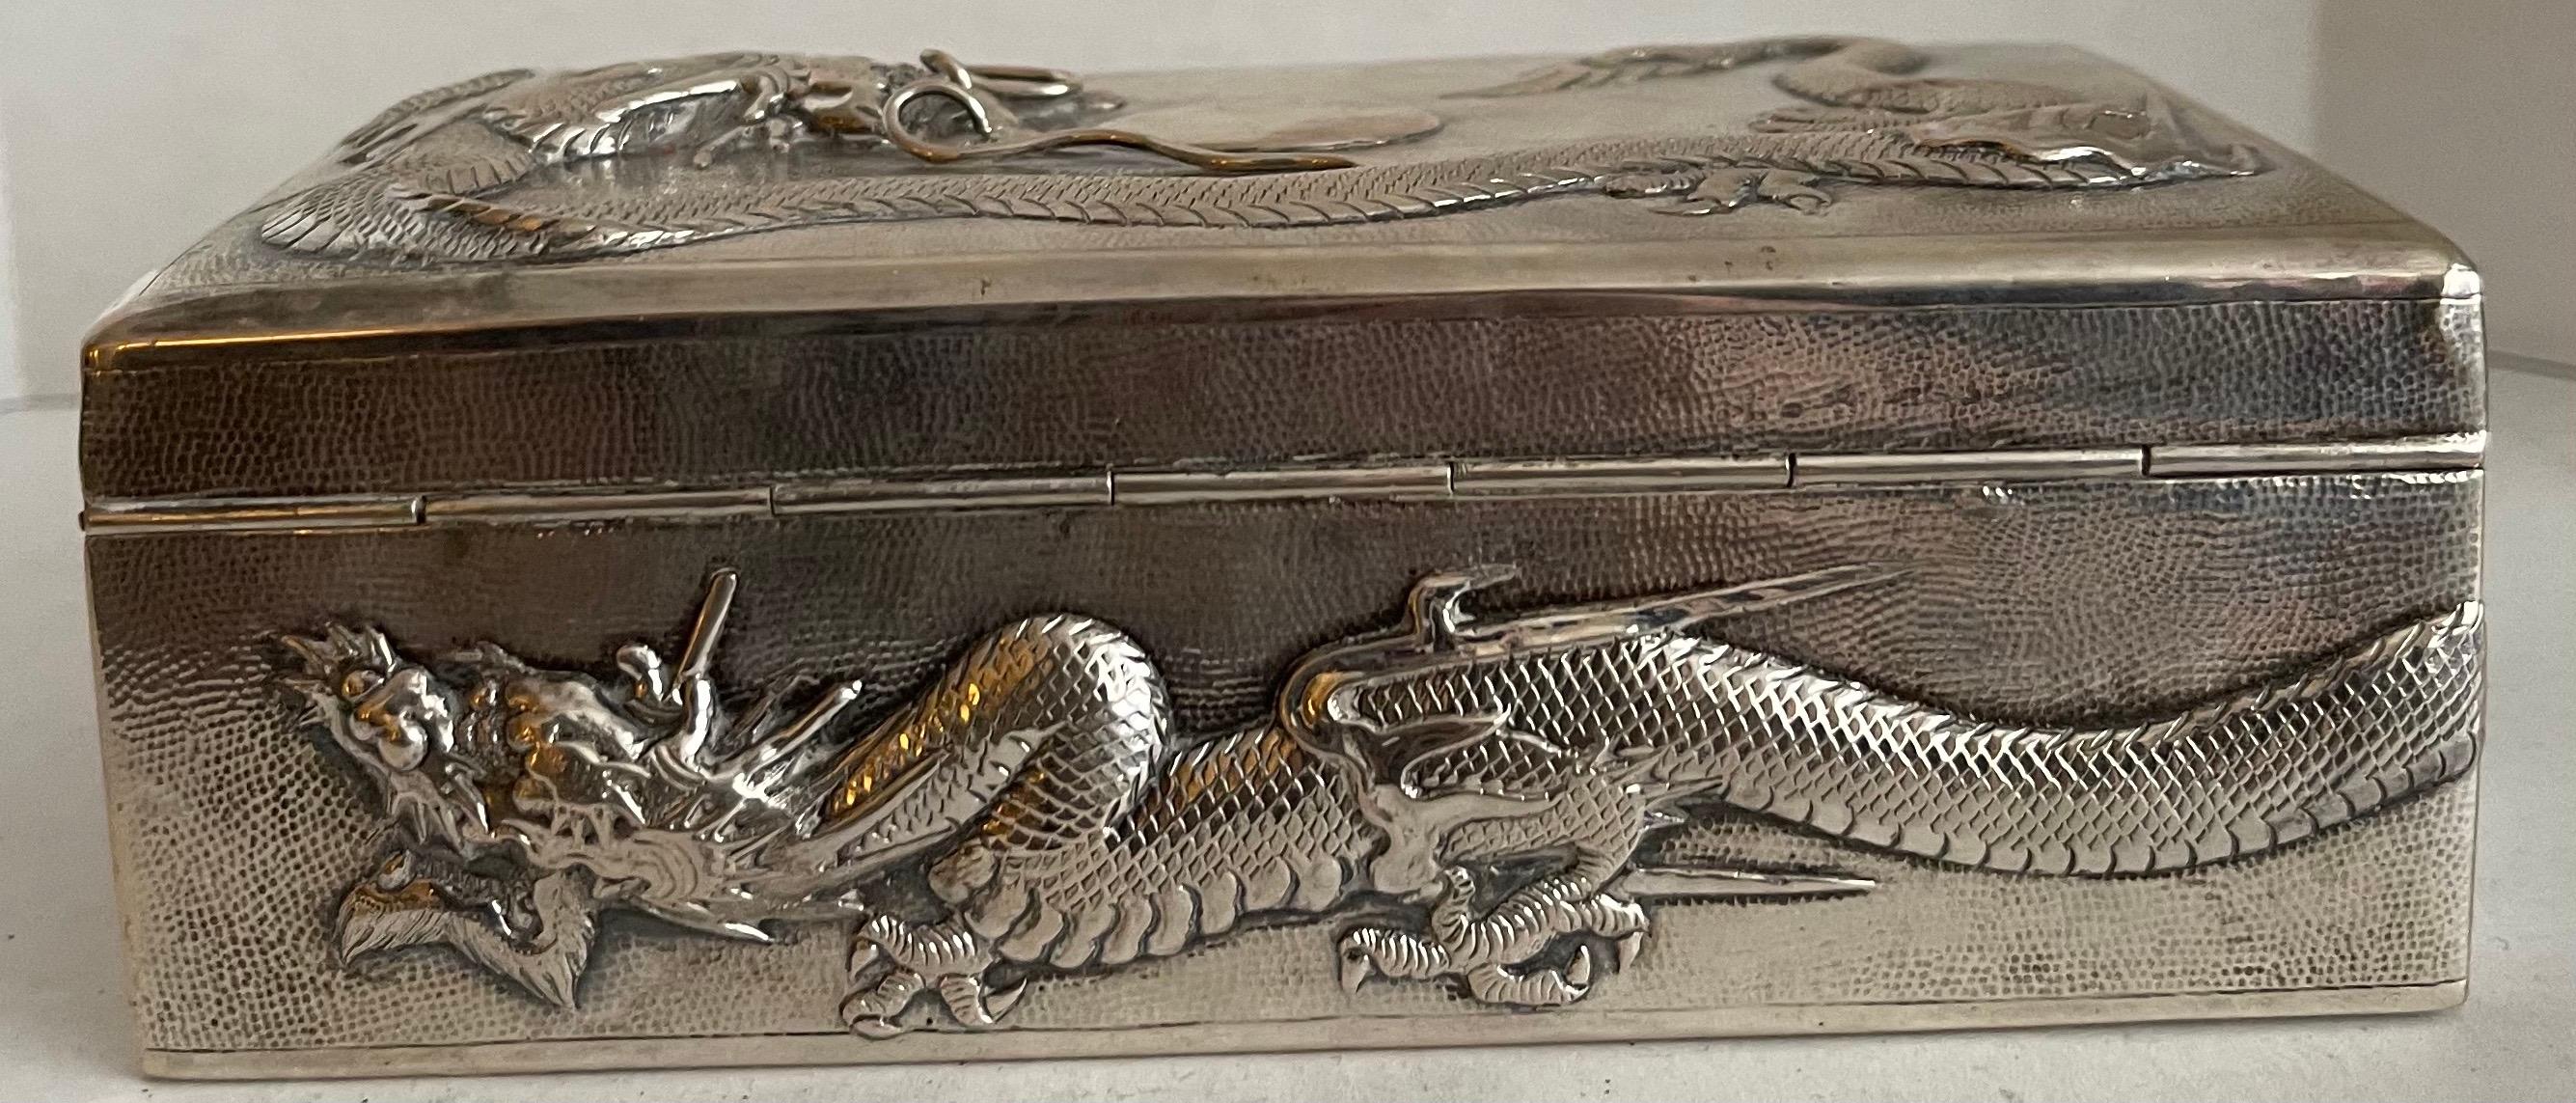 19th Century Chinese Export Silver Dragon Cigar Box For Sale 2